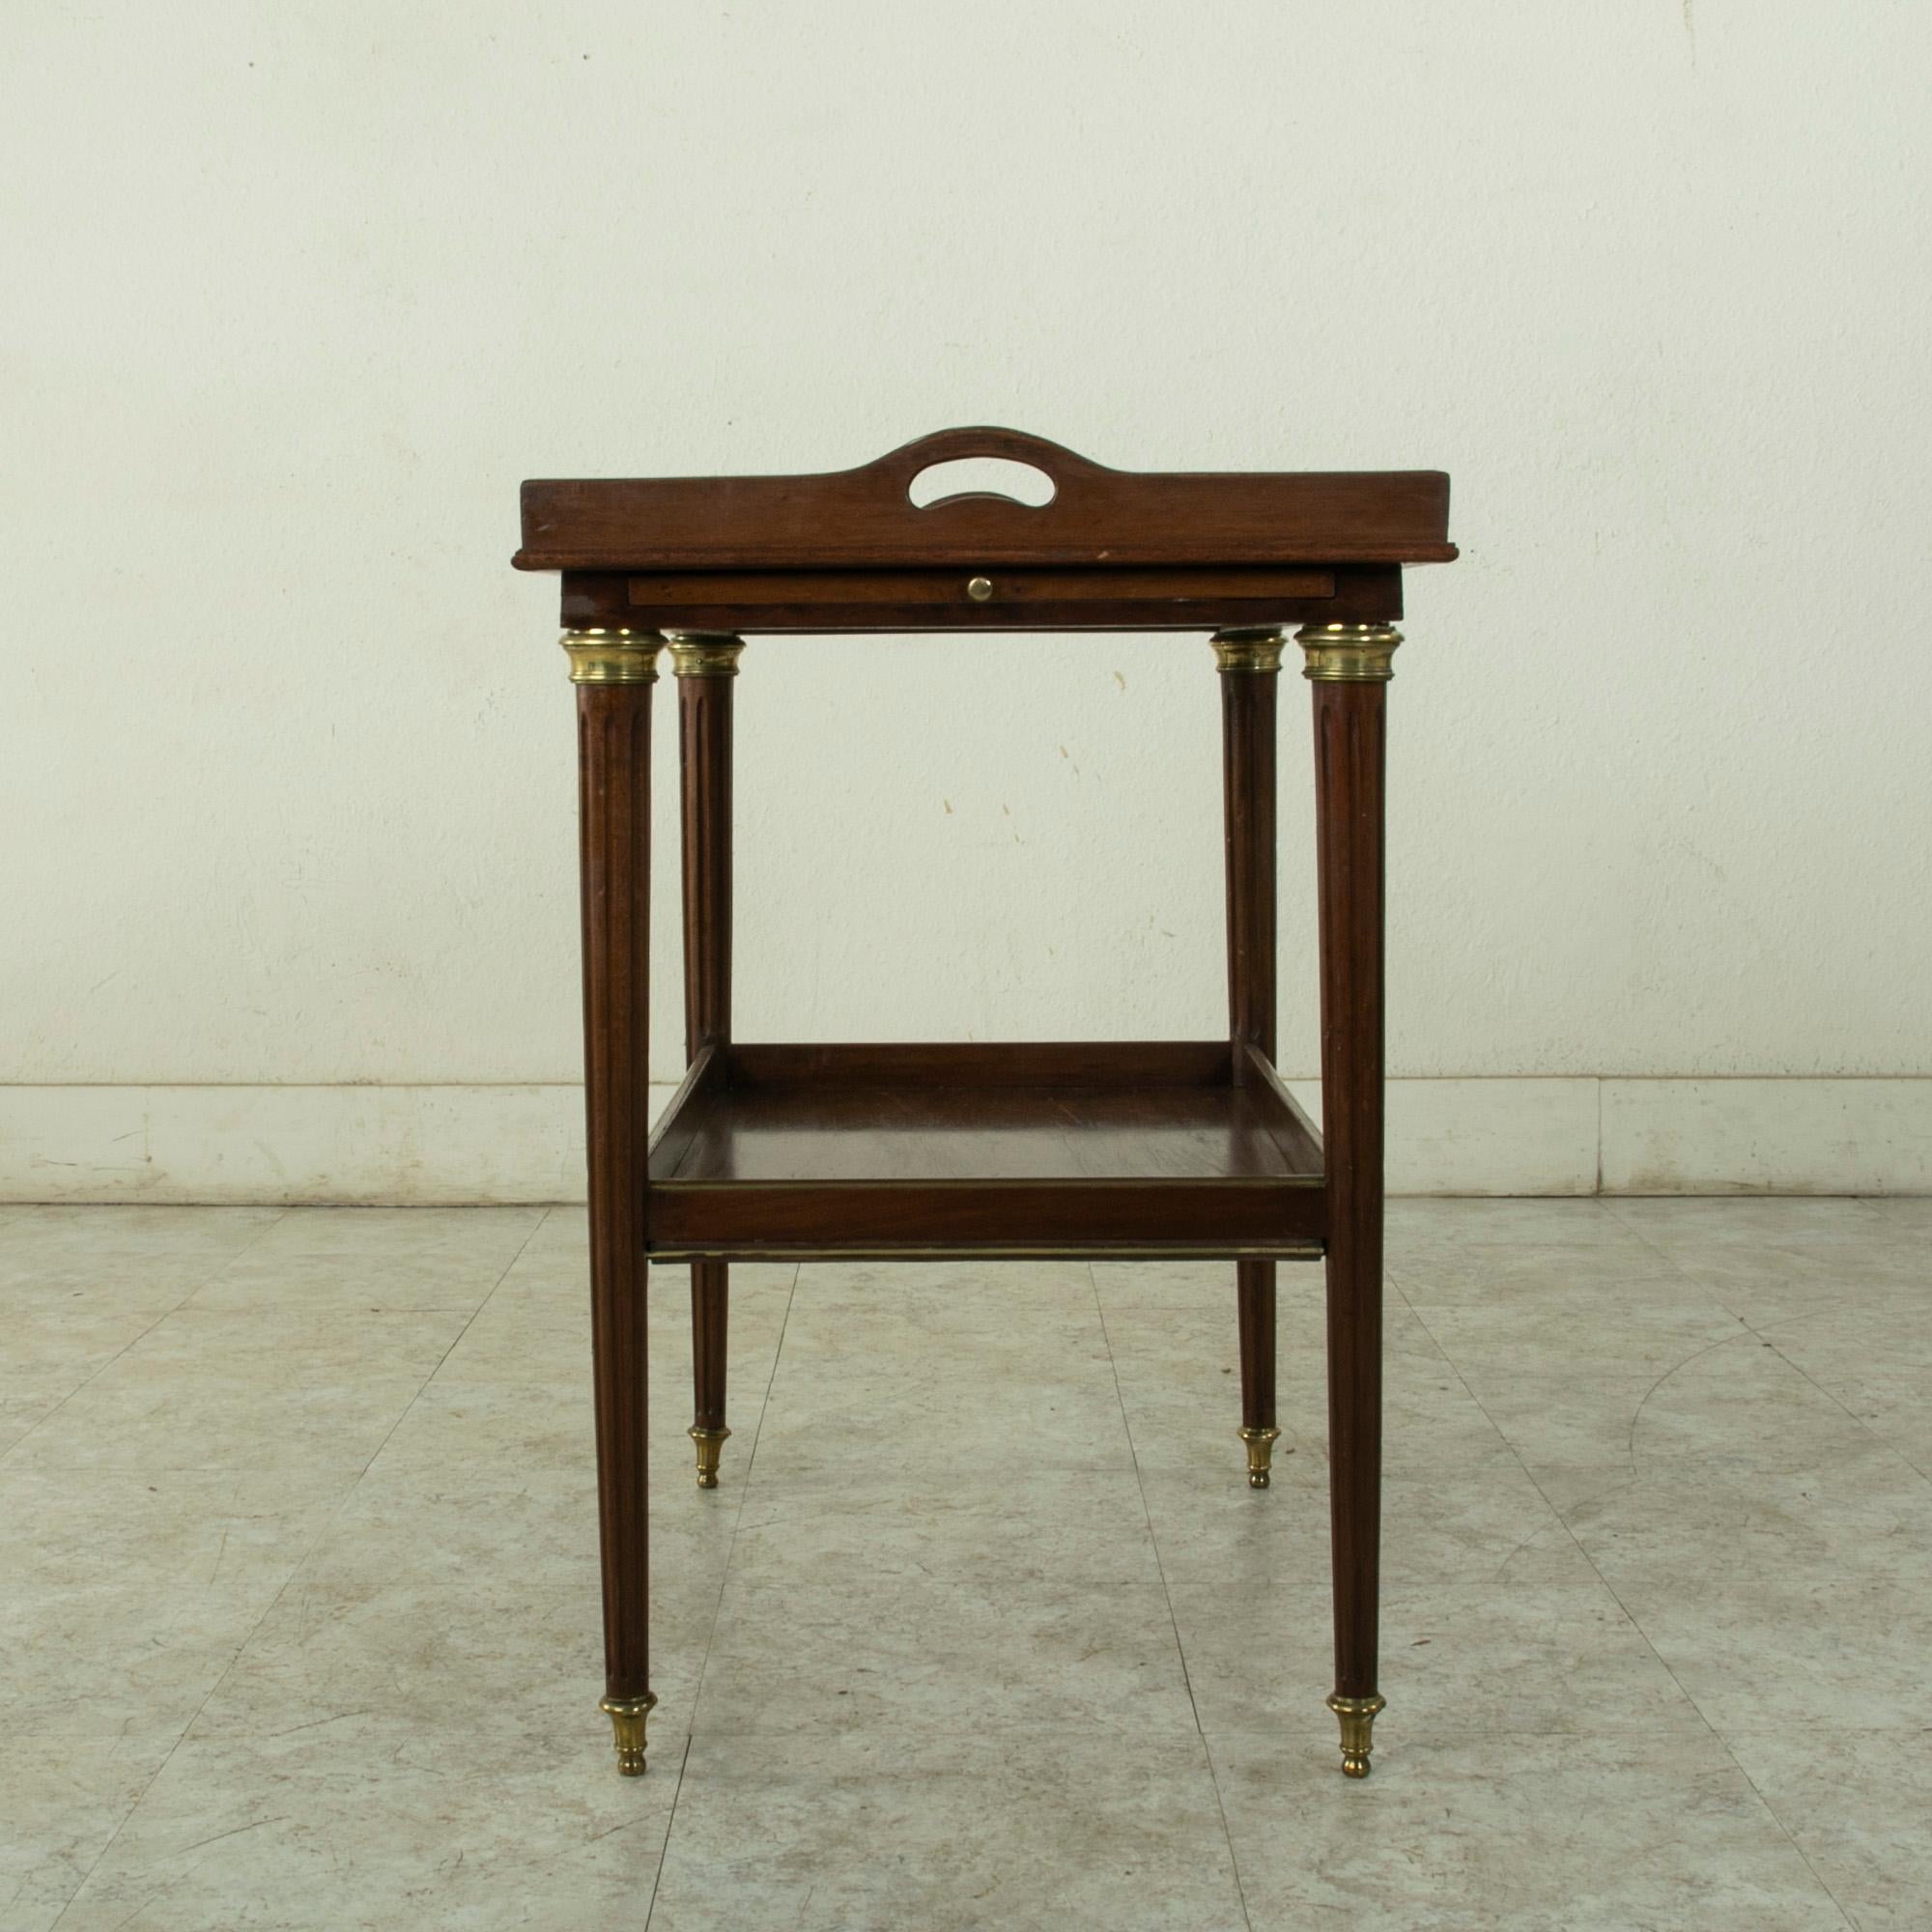 Late 19th Century French Louis XVI Style Mahogany Tray Table with Bronze Details For Sale 2